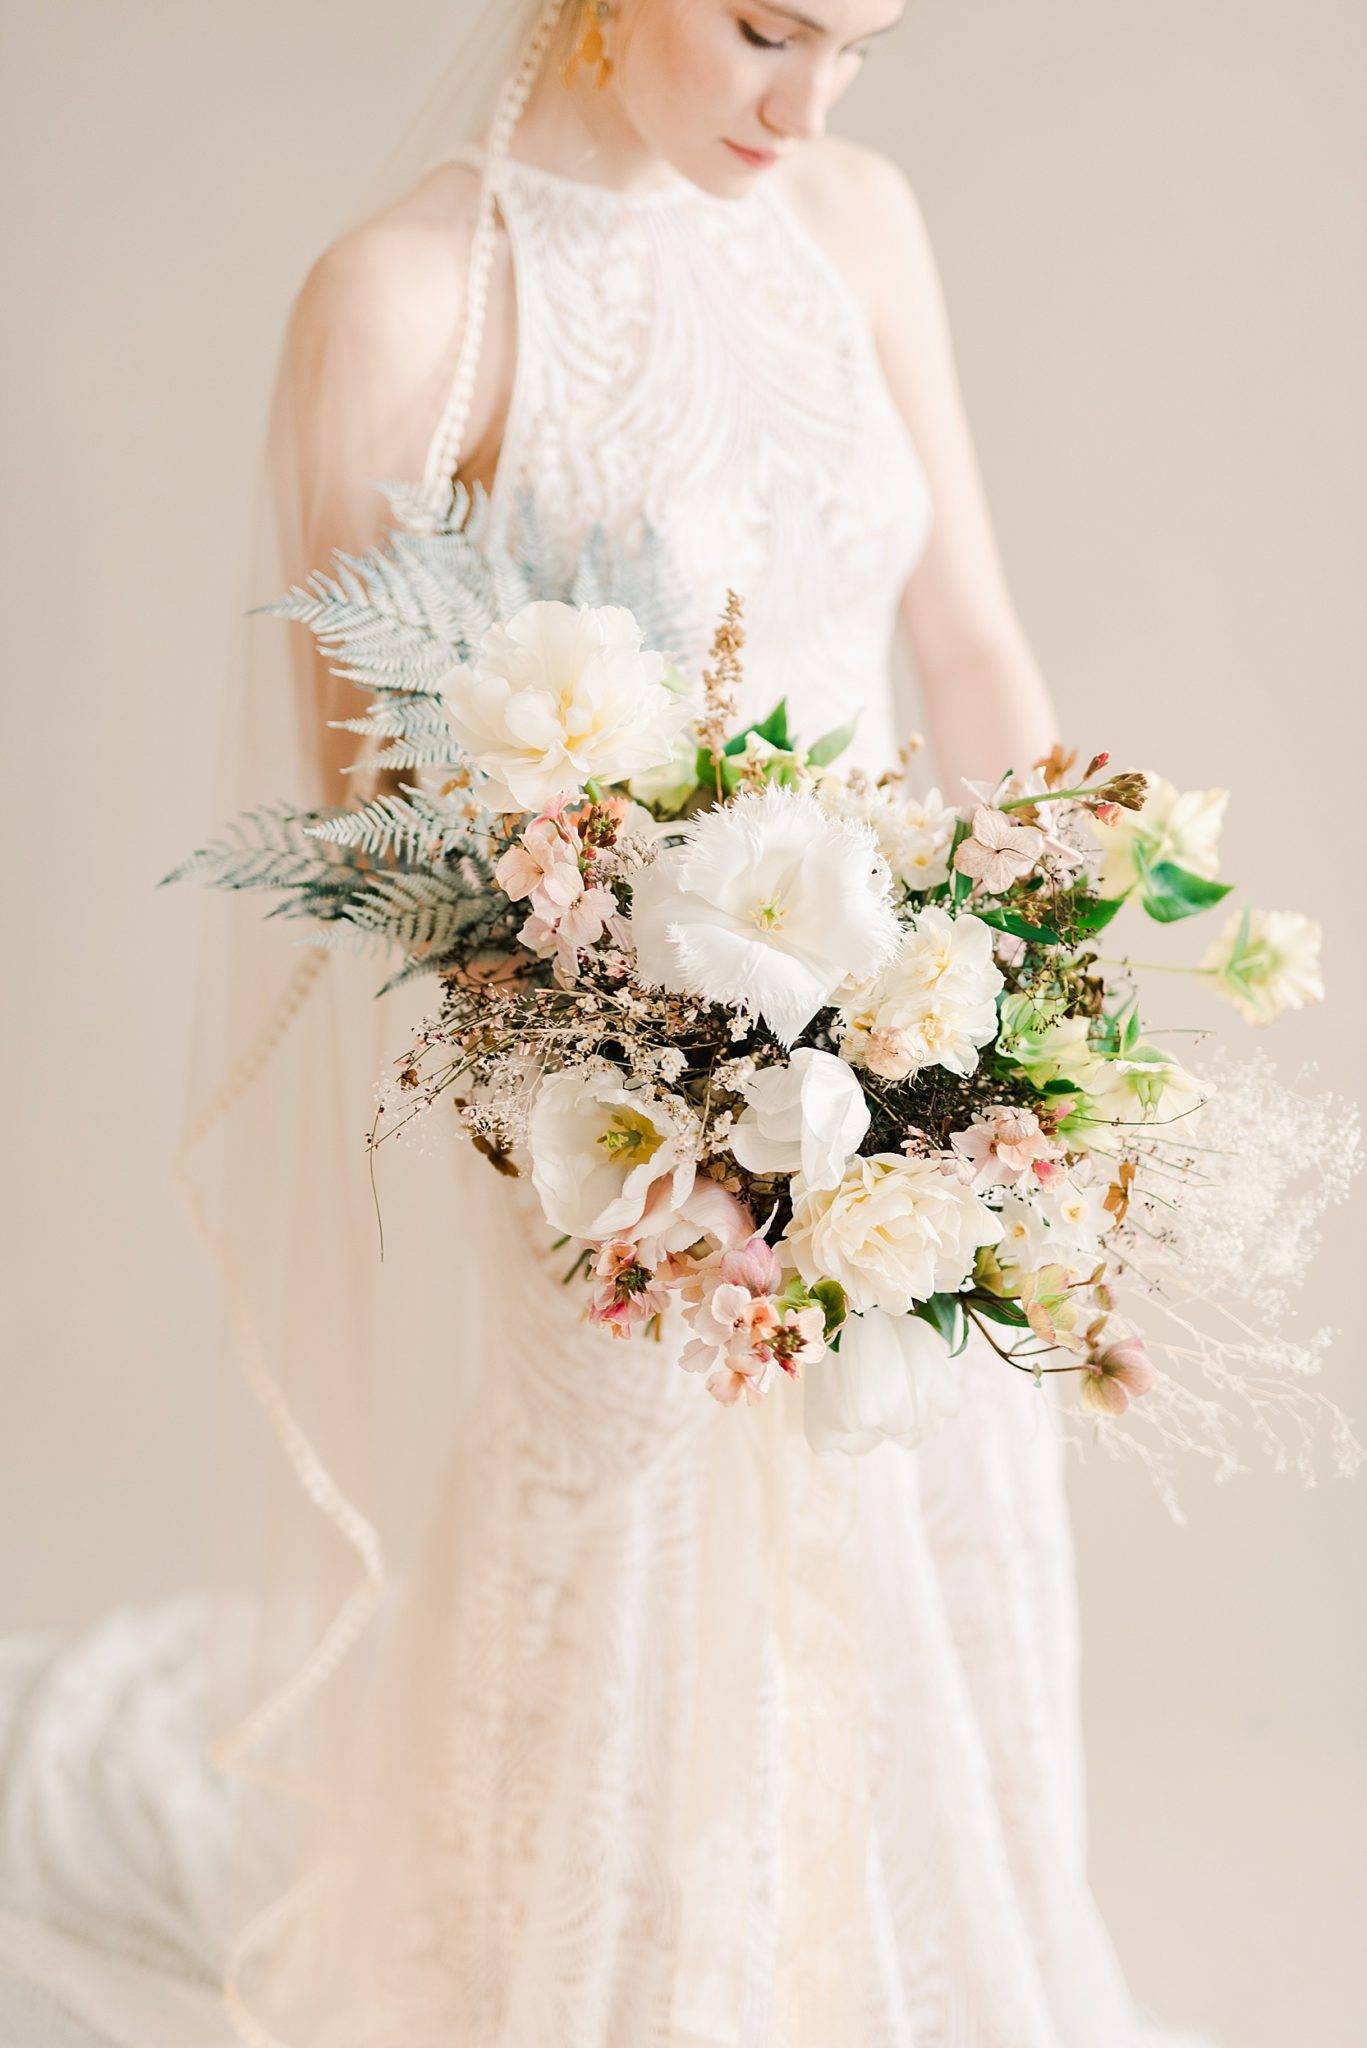 Luxury Wedding Editorial: Bride Posing with Bouquet Edited with REFINED Co Film Presets